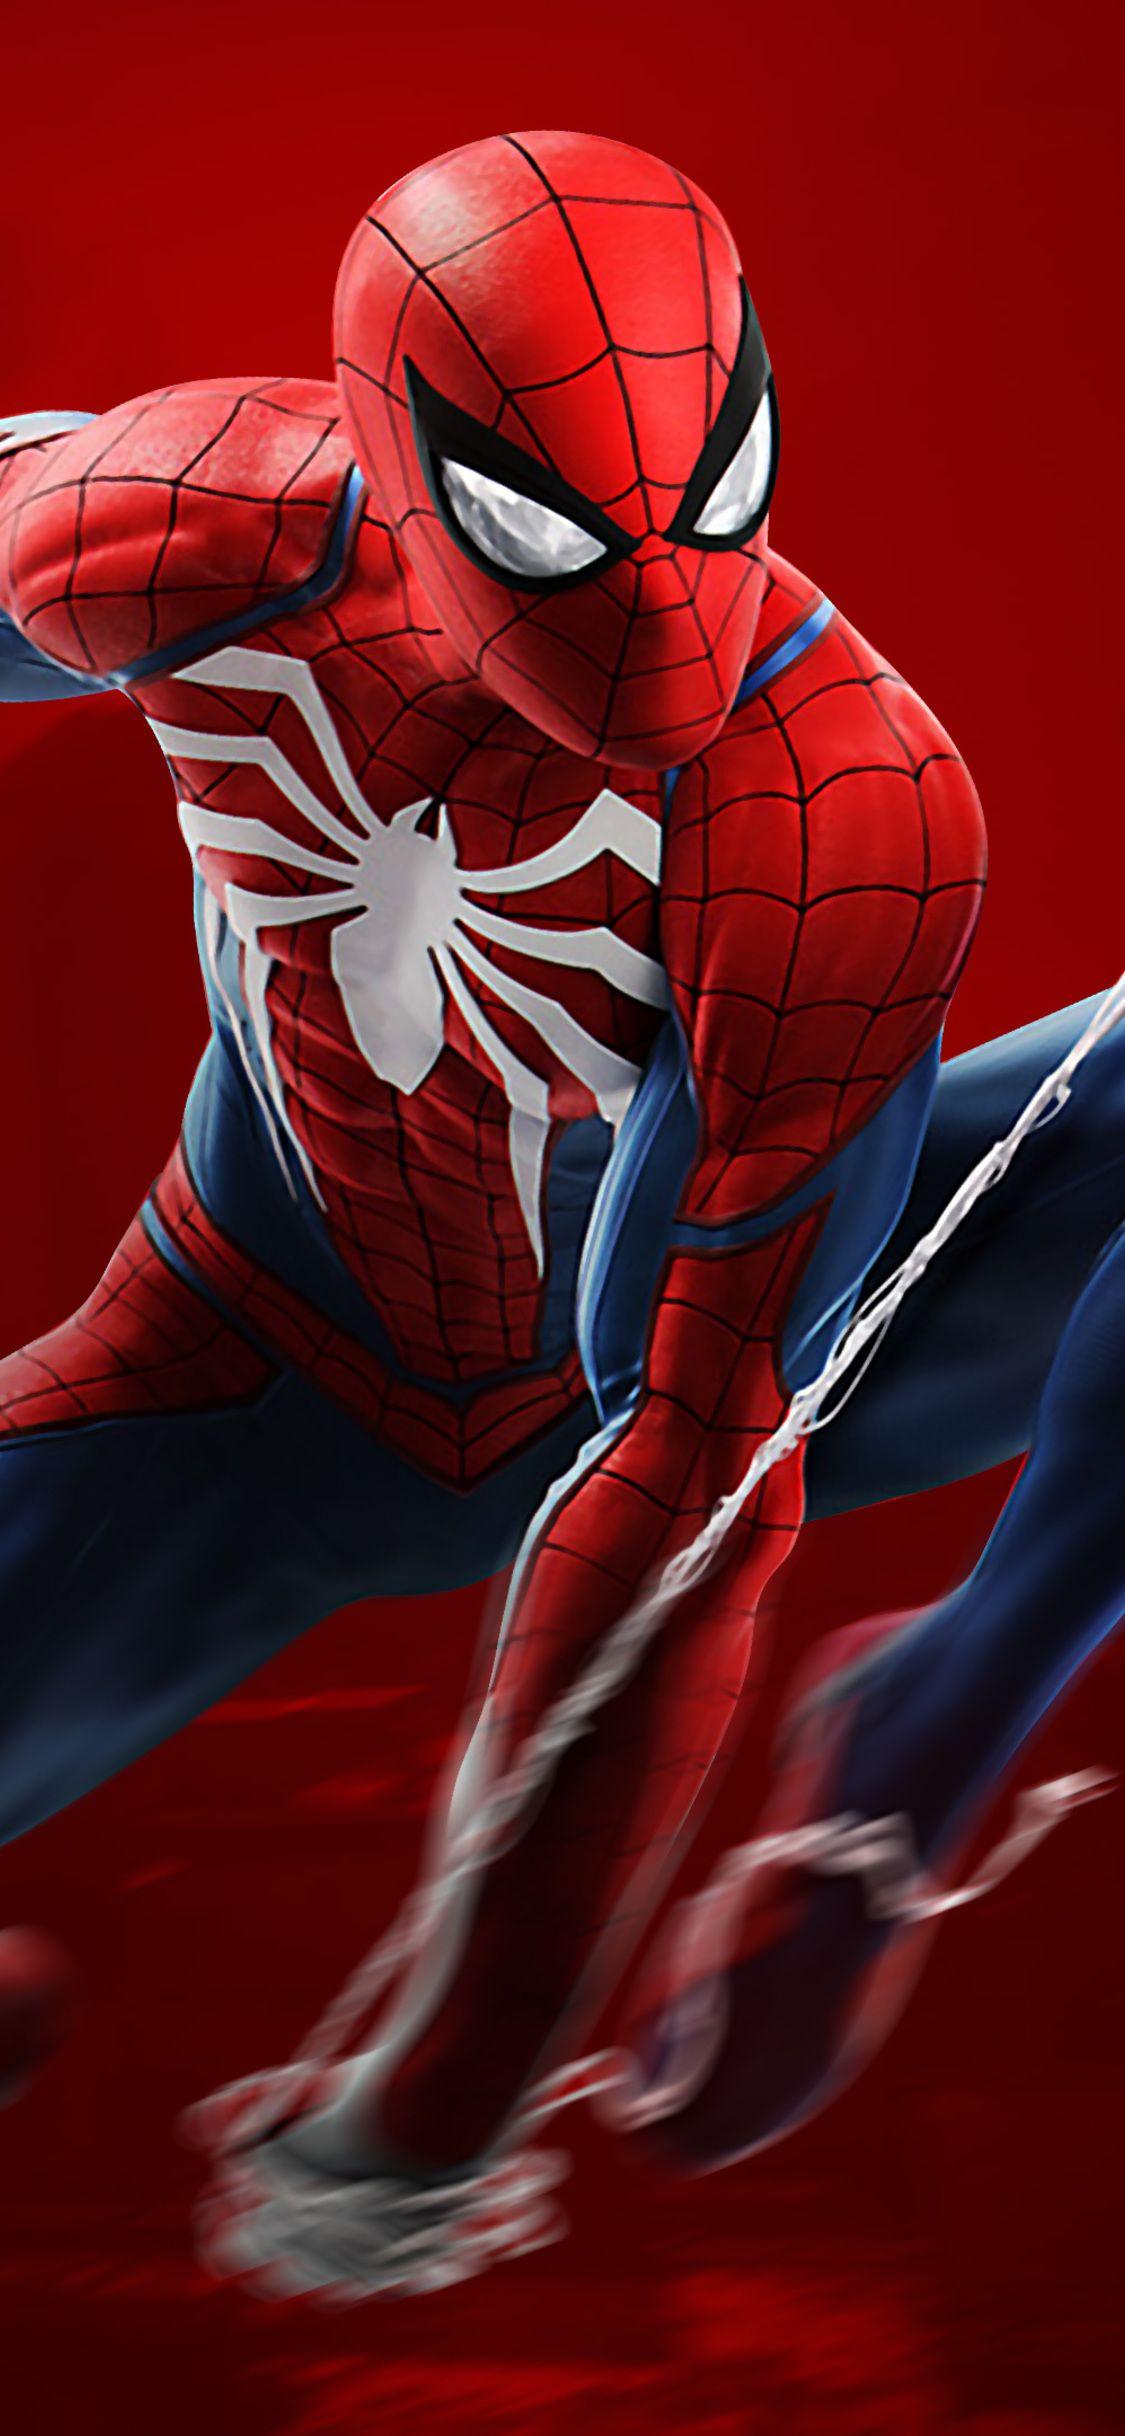 HD Spider-Man iPhone Wallpapers - Wallpaper Cave